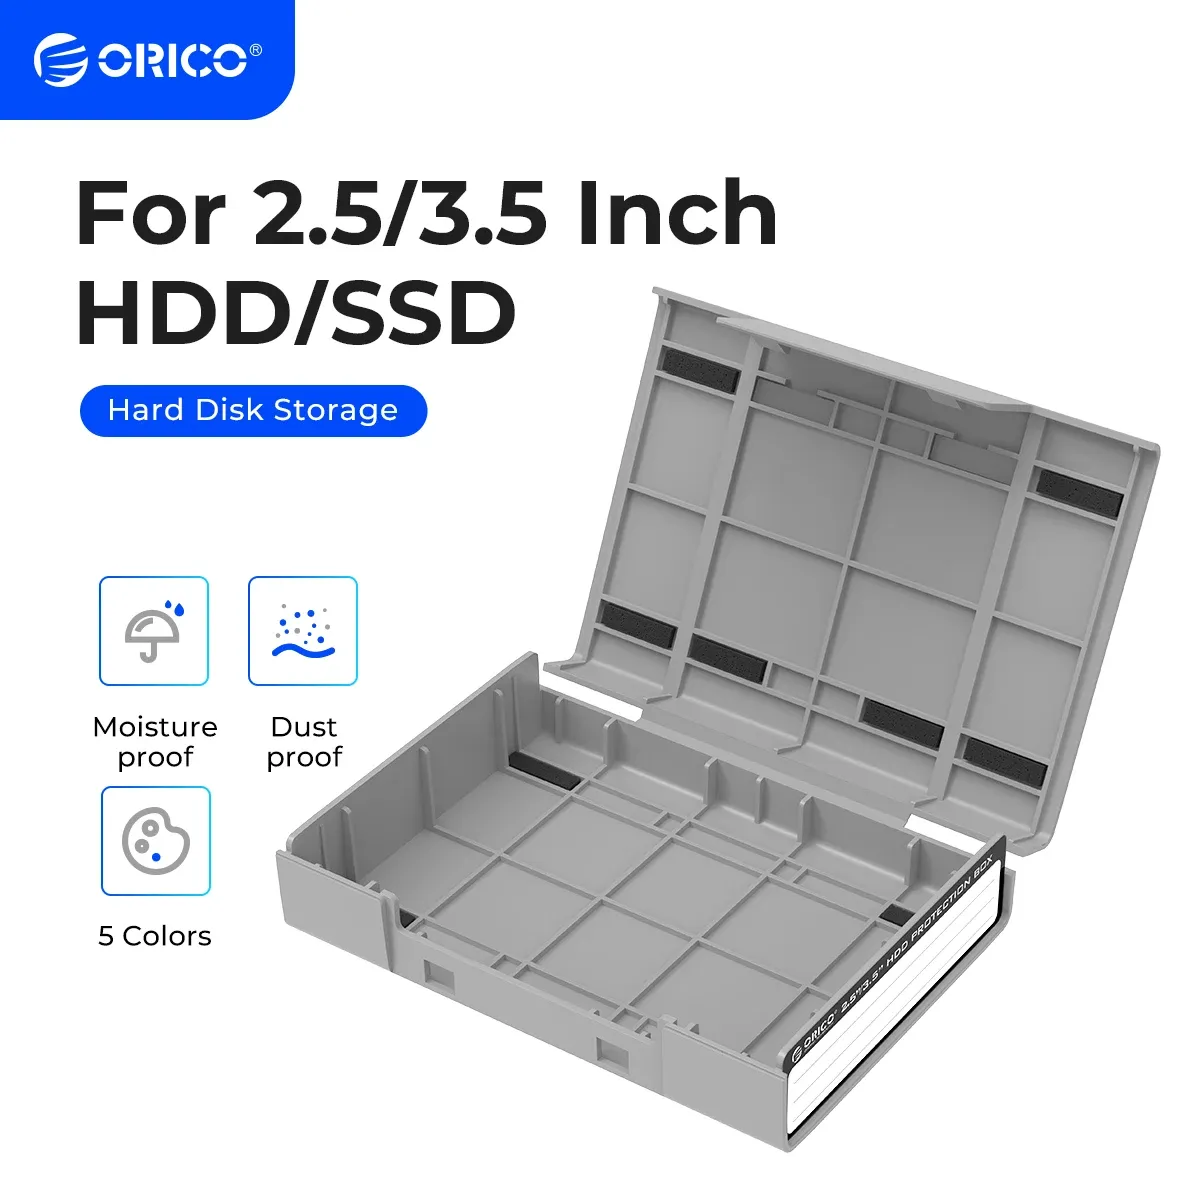 Cases ORICO SSD M.2 Protect Case Hard Case Box with Label for 2.5/3.5 inch Hard Drive Disk SSD HDD Case Waterproof Storage Box